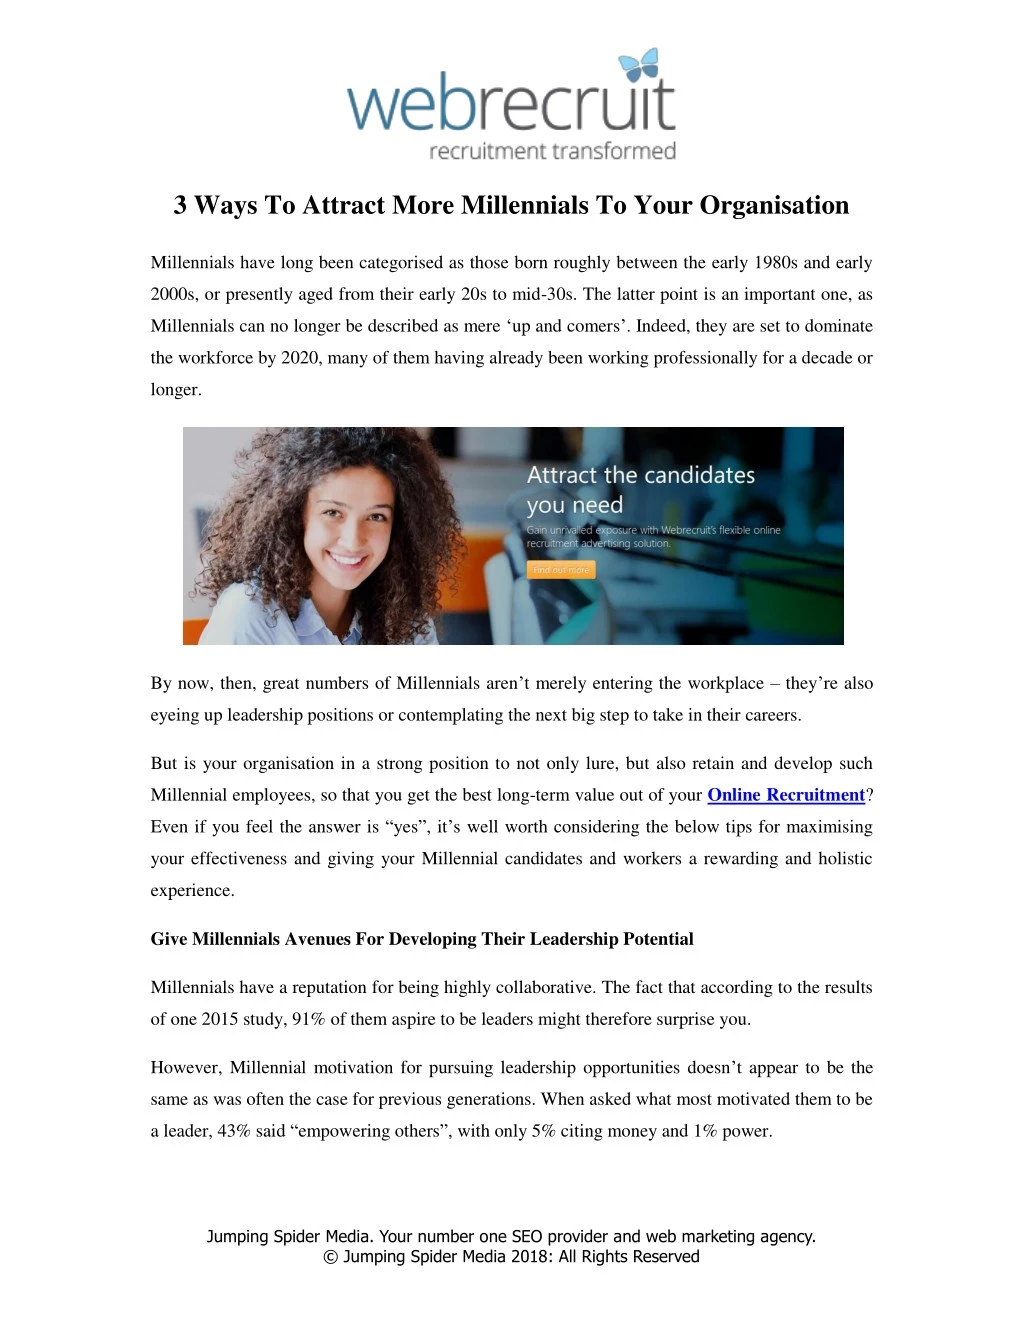 3 ways to attract more millennials to your